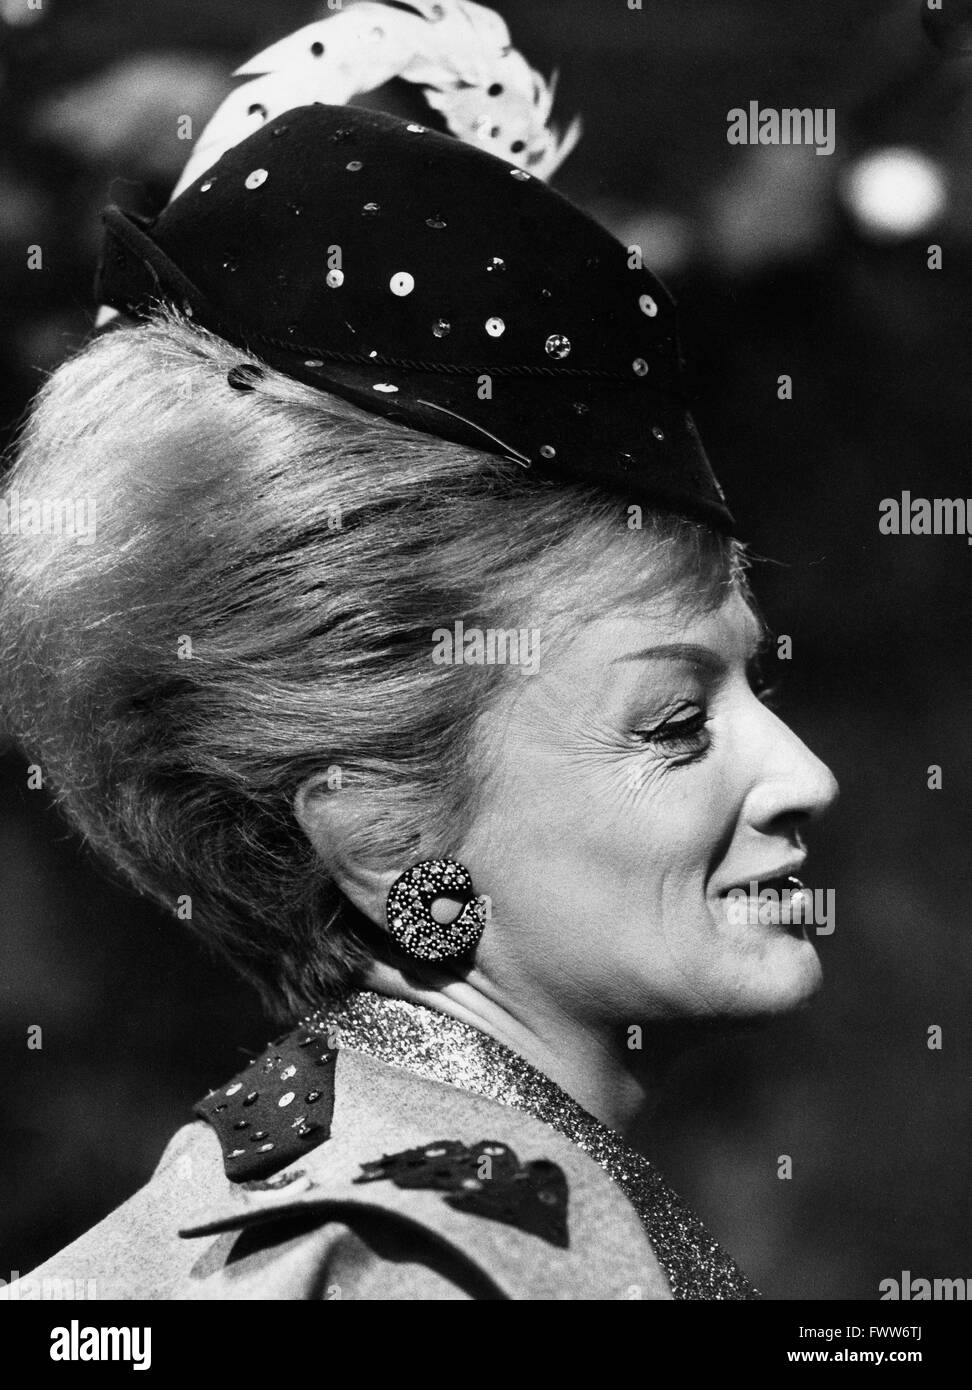 actress images and hi-res and Page - stock television Alamy 3 German photography - film